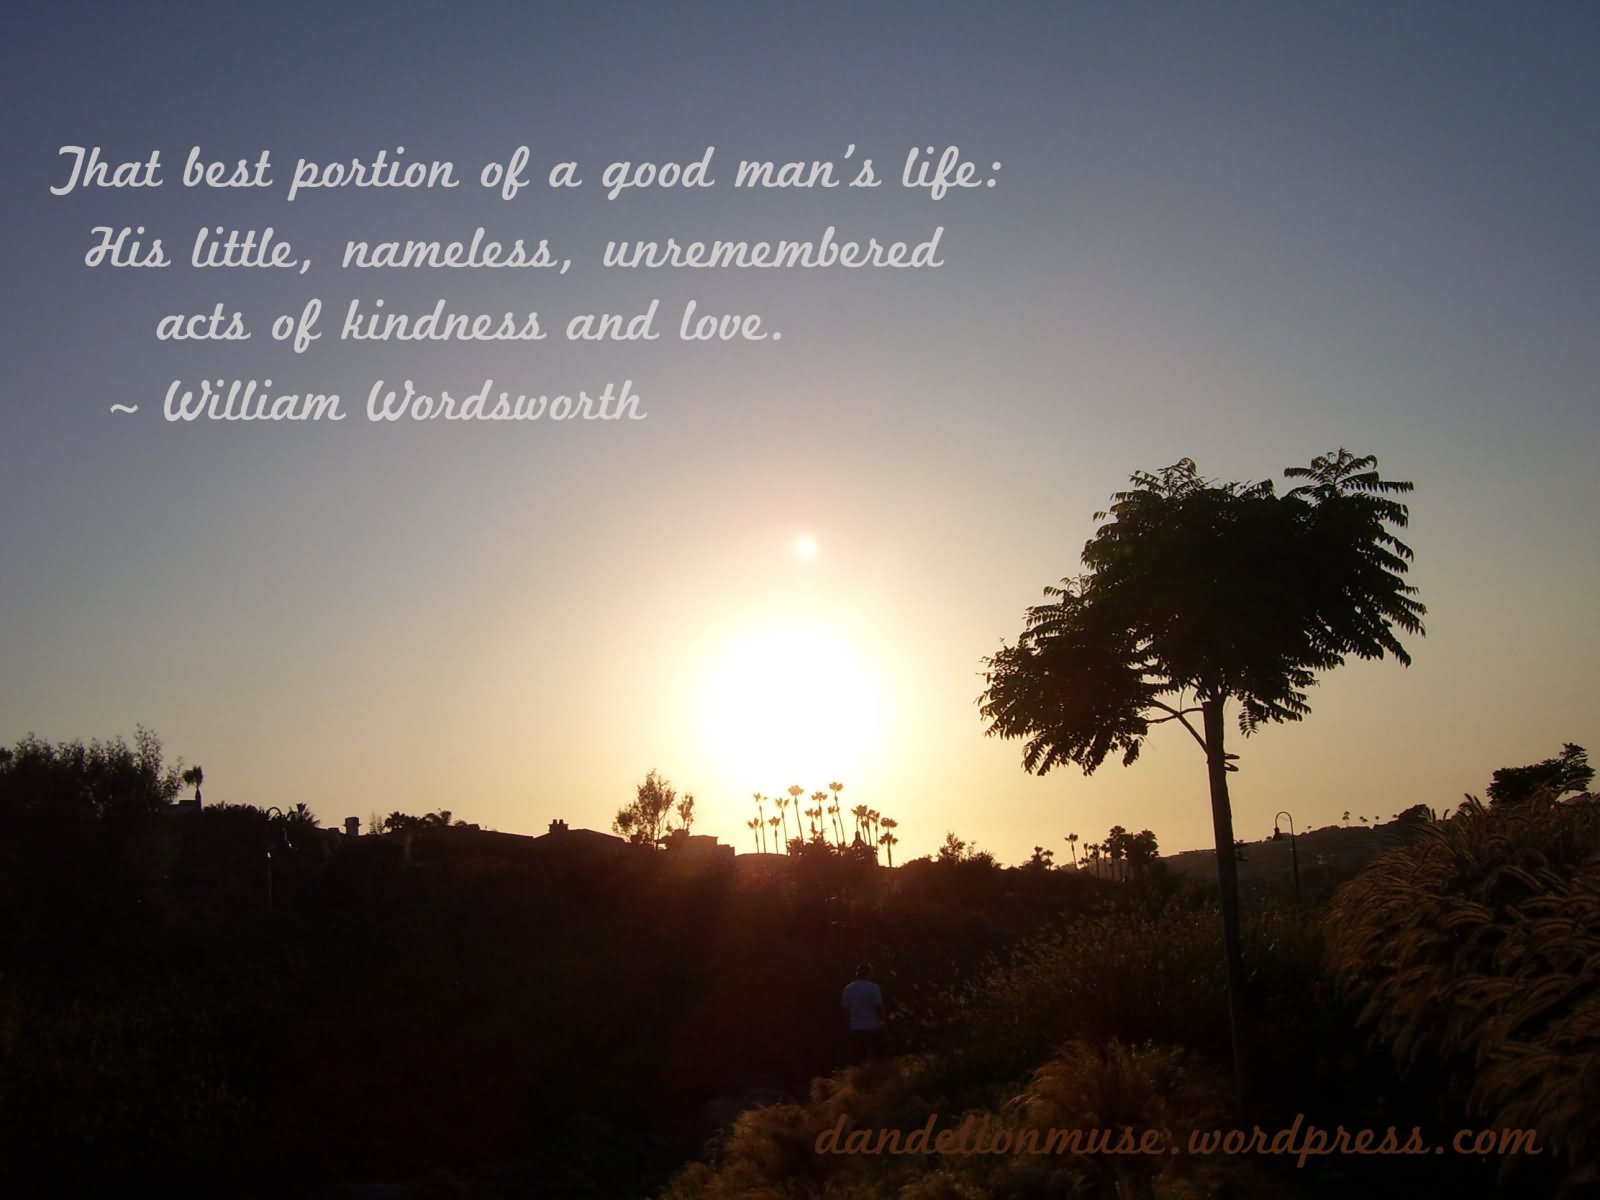 The best portion of a good man's life his little, nameless unremembered acts of kindness and love  - William Wordsworth